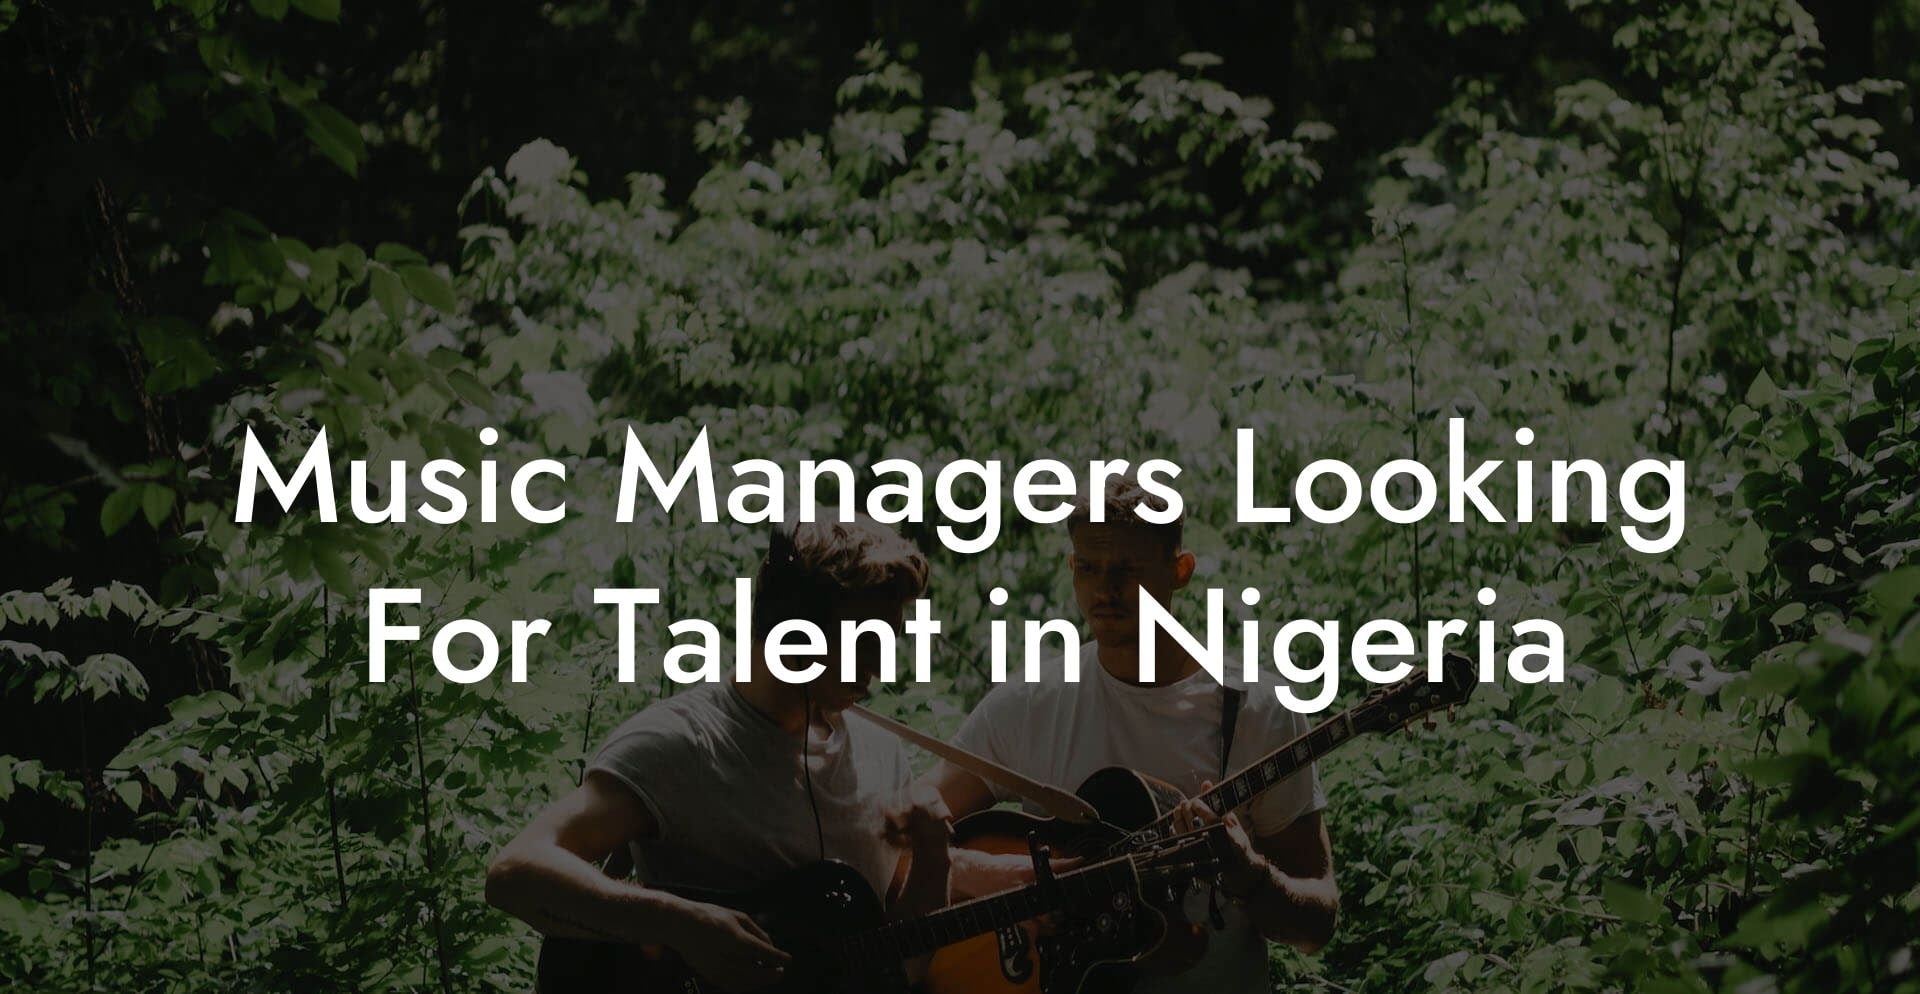 Music Managers Looking For Talent in Nigeria